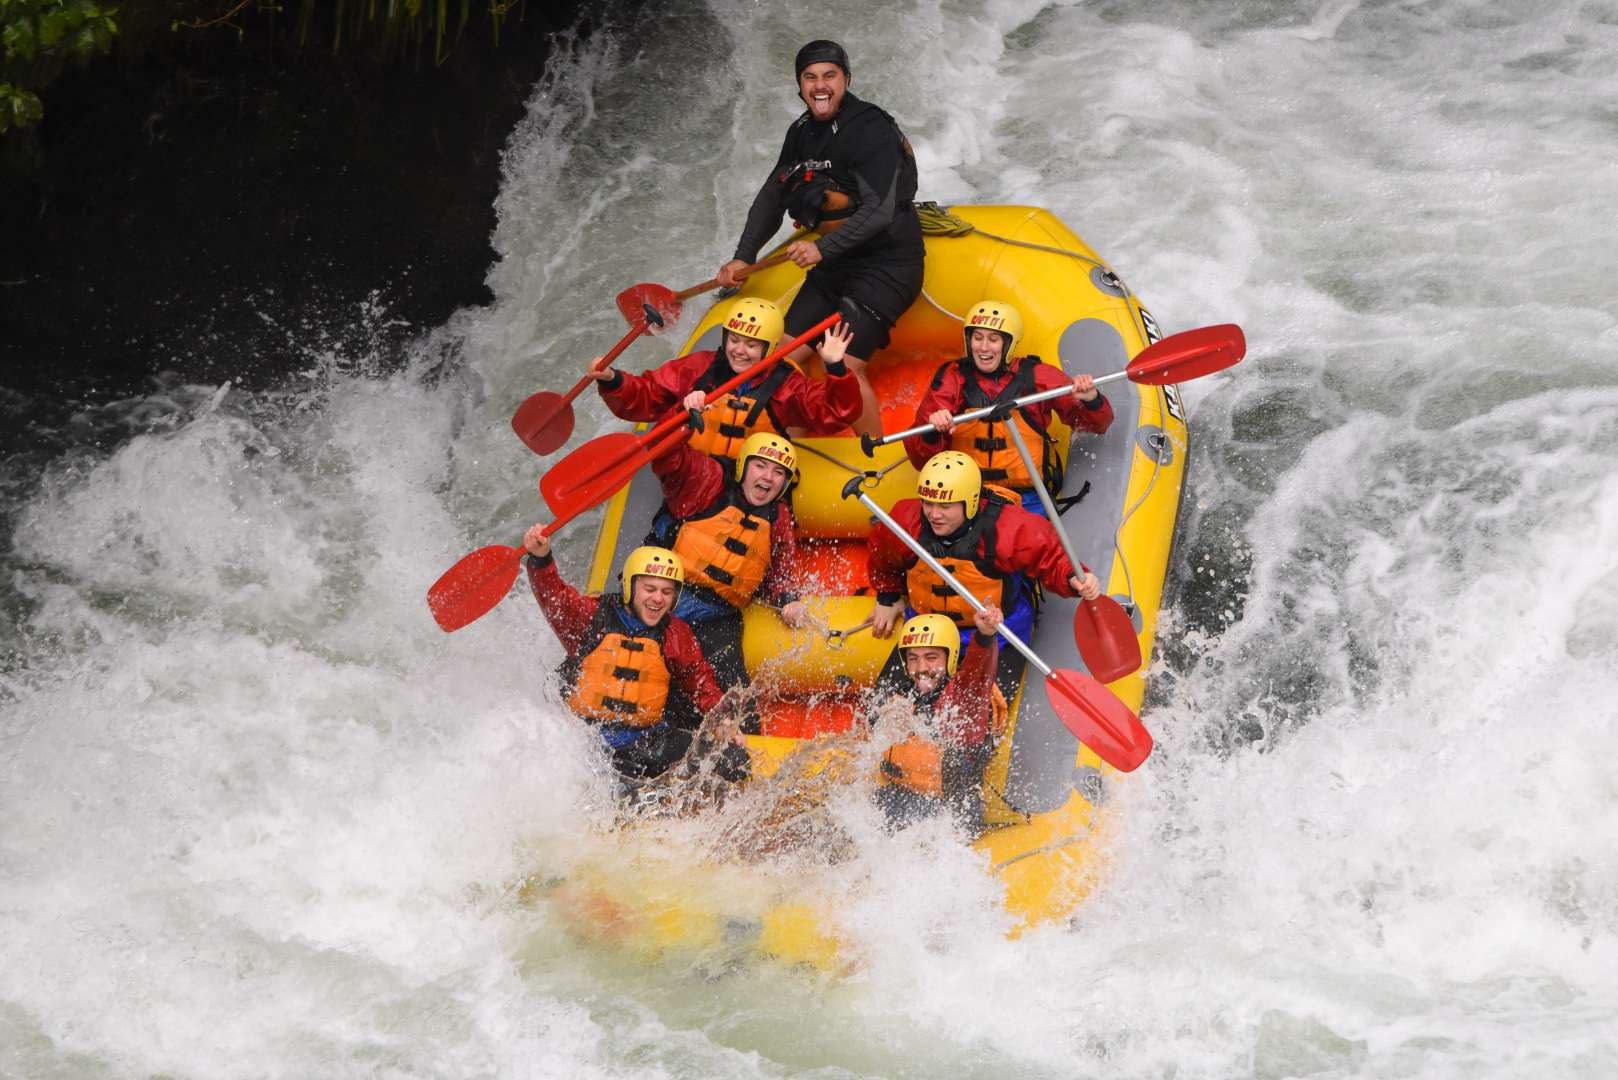 Rotoruas Largest Commercially Rafting Waterfall in the WORLD